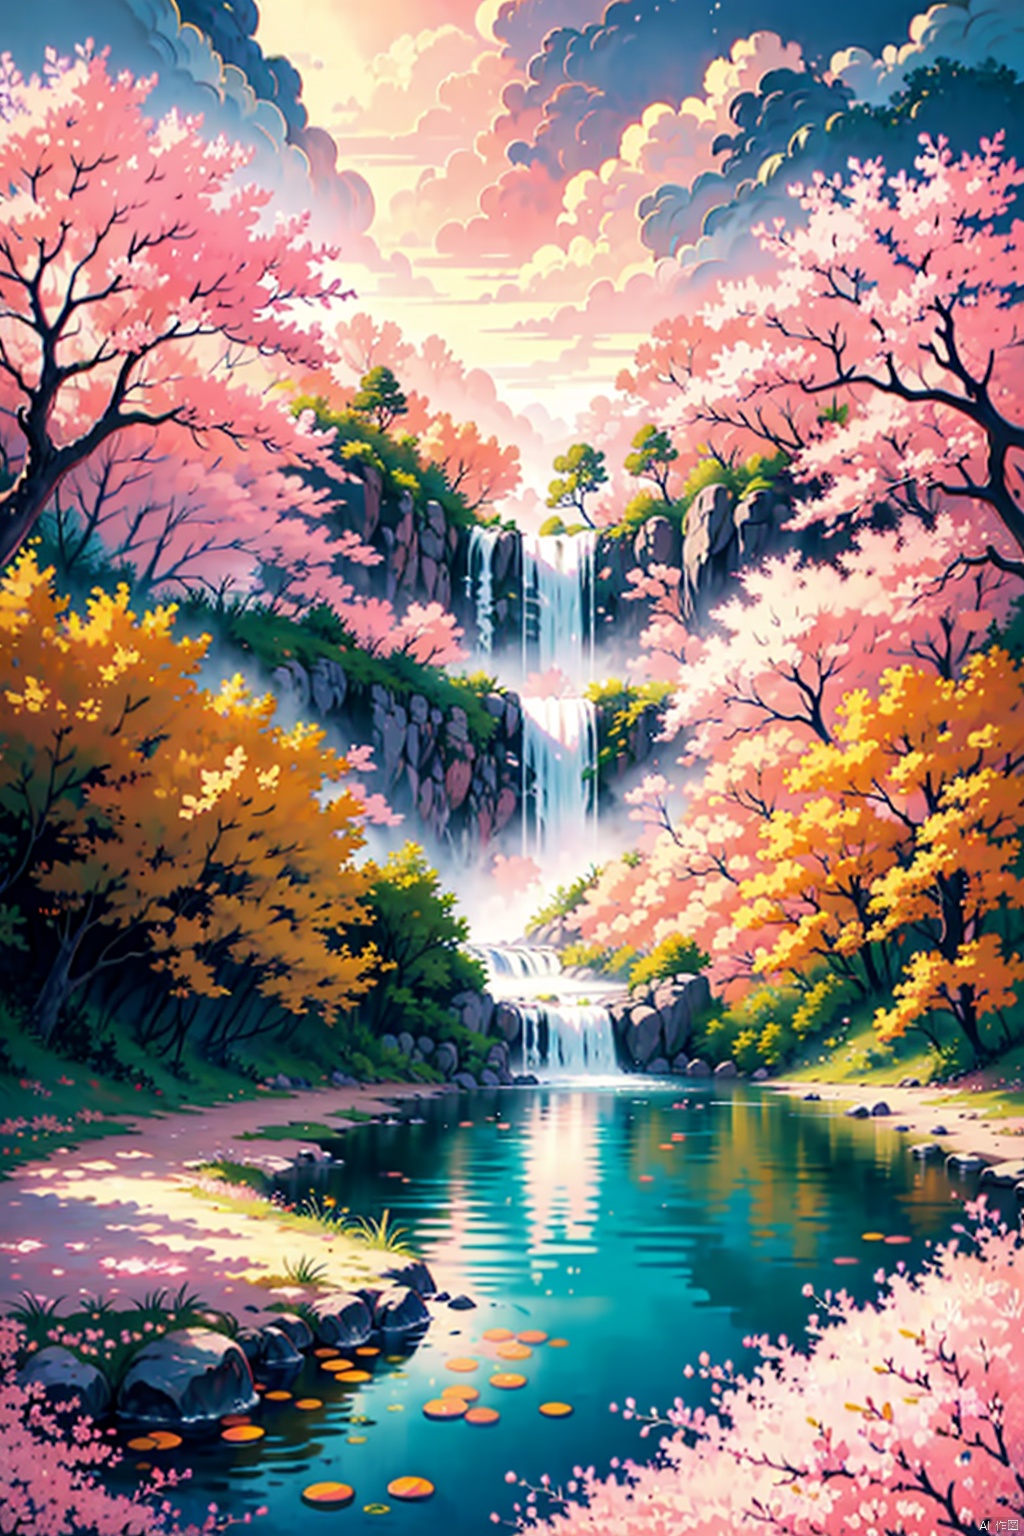  (Landscape painting full of illusory artistic conception), (high waterfall falling from the sky), the waterfall occupies 80% of the entire length of the picture, above the waterfall is the blue sky, rolling white clouds, below the waterfall is the pond, (the water of the pond is floating on the Many scattered (pink peach: 1.3) flowers), (there is a (peach forest: 1.3), (pink: 1.2) flower by the pond), (the setting sun shines slantly through the clouds), vividcolor (light particles Effect), (masterpiece), (extremely exquisite picture description), (8k wallpaper), (master painting), (ink painting style), (obvious light and shadow effect), (ray tracing), (obvious levels), (depth of field) ),(best quality),RAY, desert_sky, Succulent_Plants, Oil-paper umbrella